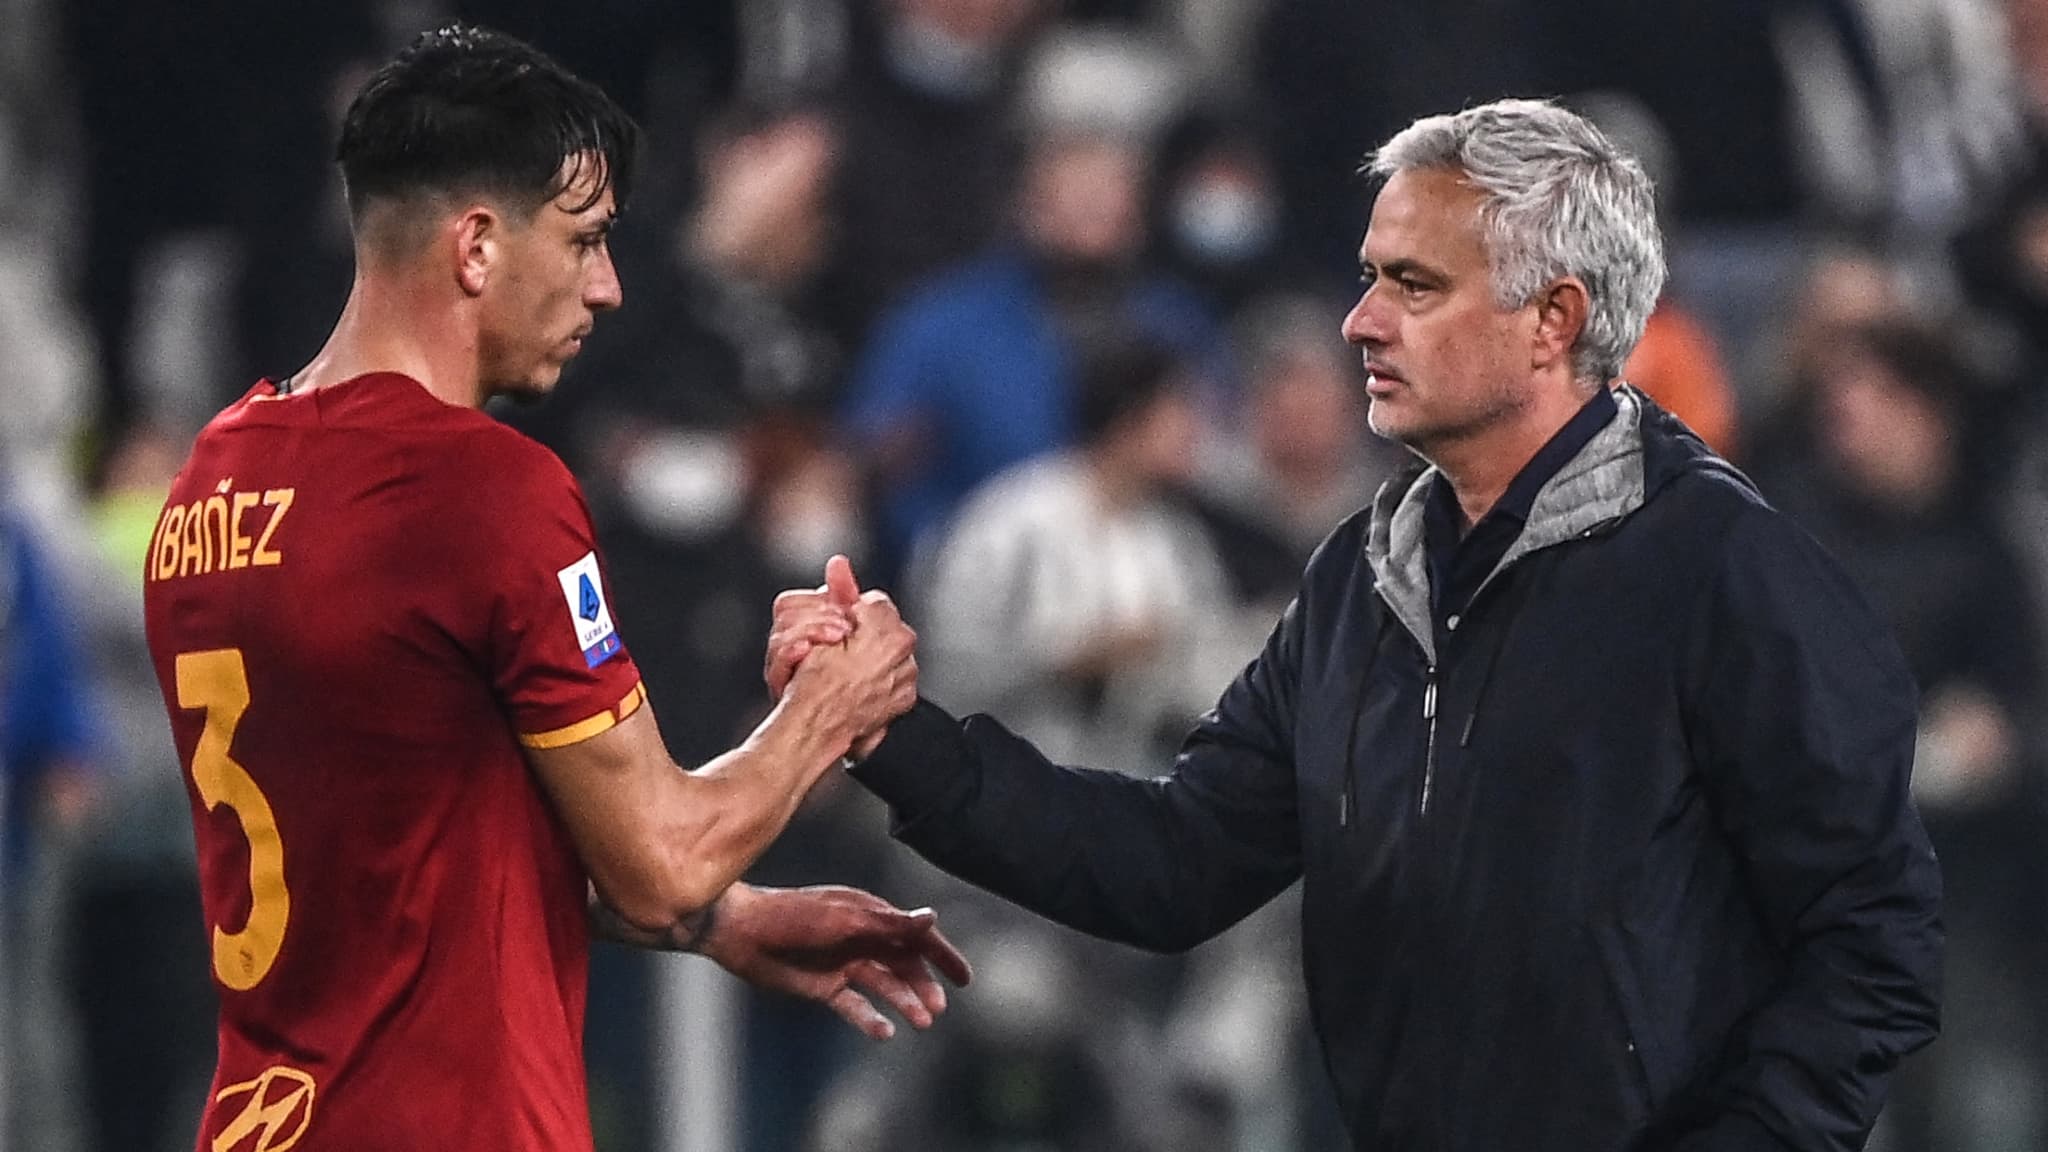 “Mourinho is born bipolar,” a player from Rome has confidence in Mourinho’s personality